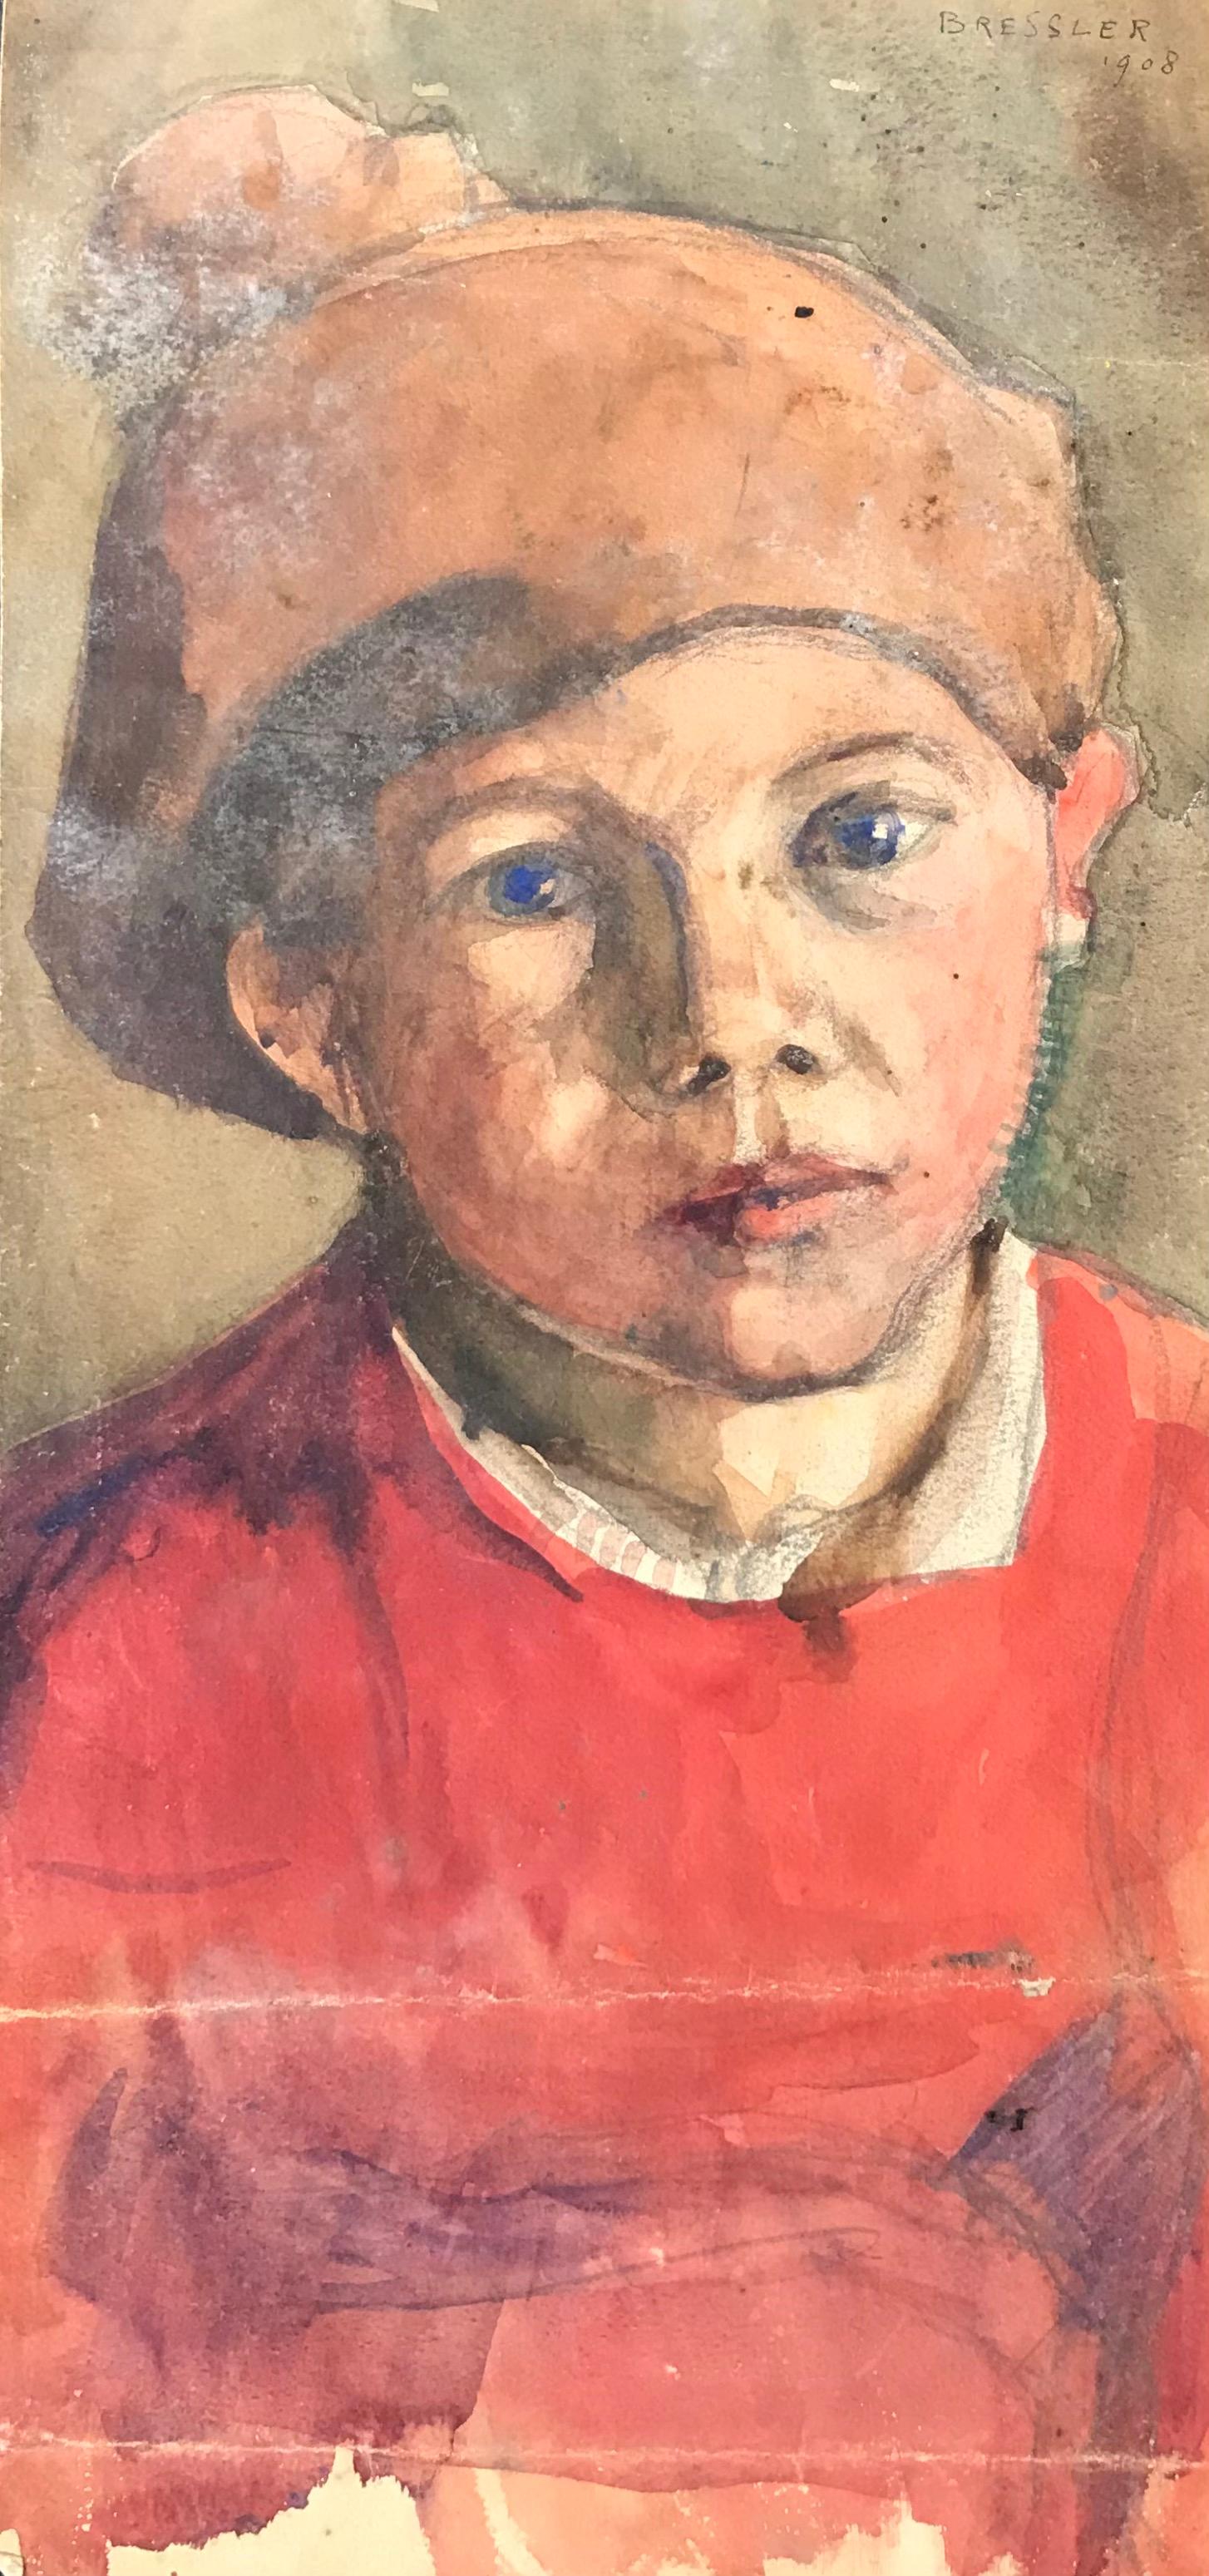 Emile Bressler Portrait Painting - Young child with blue eyes